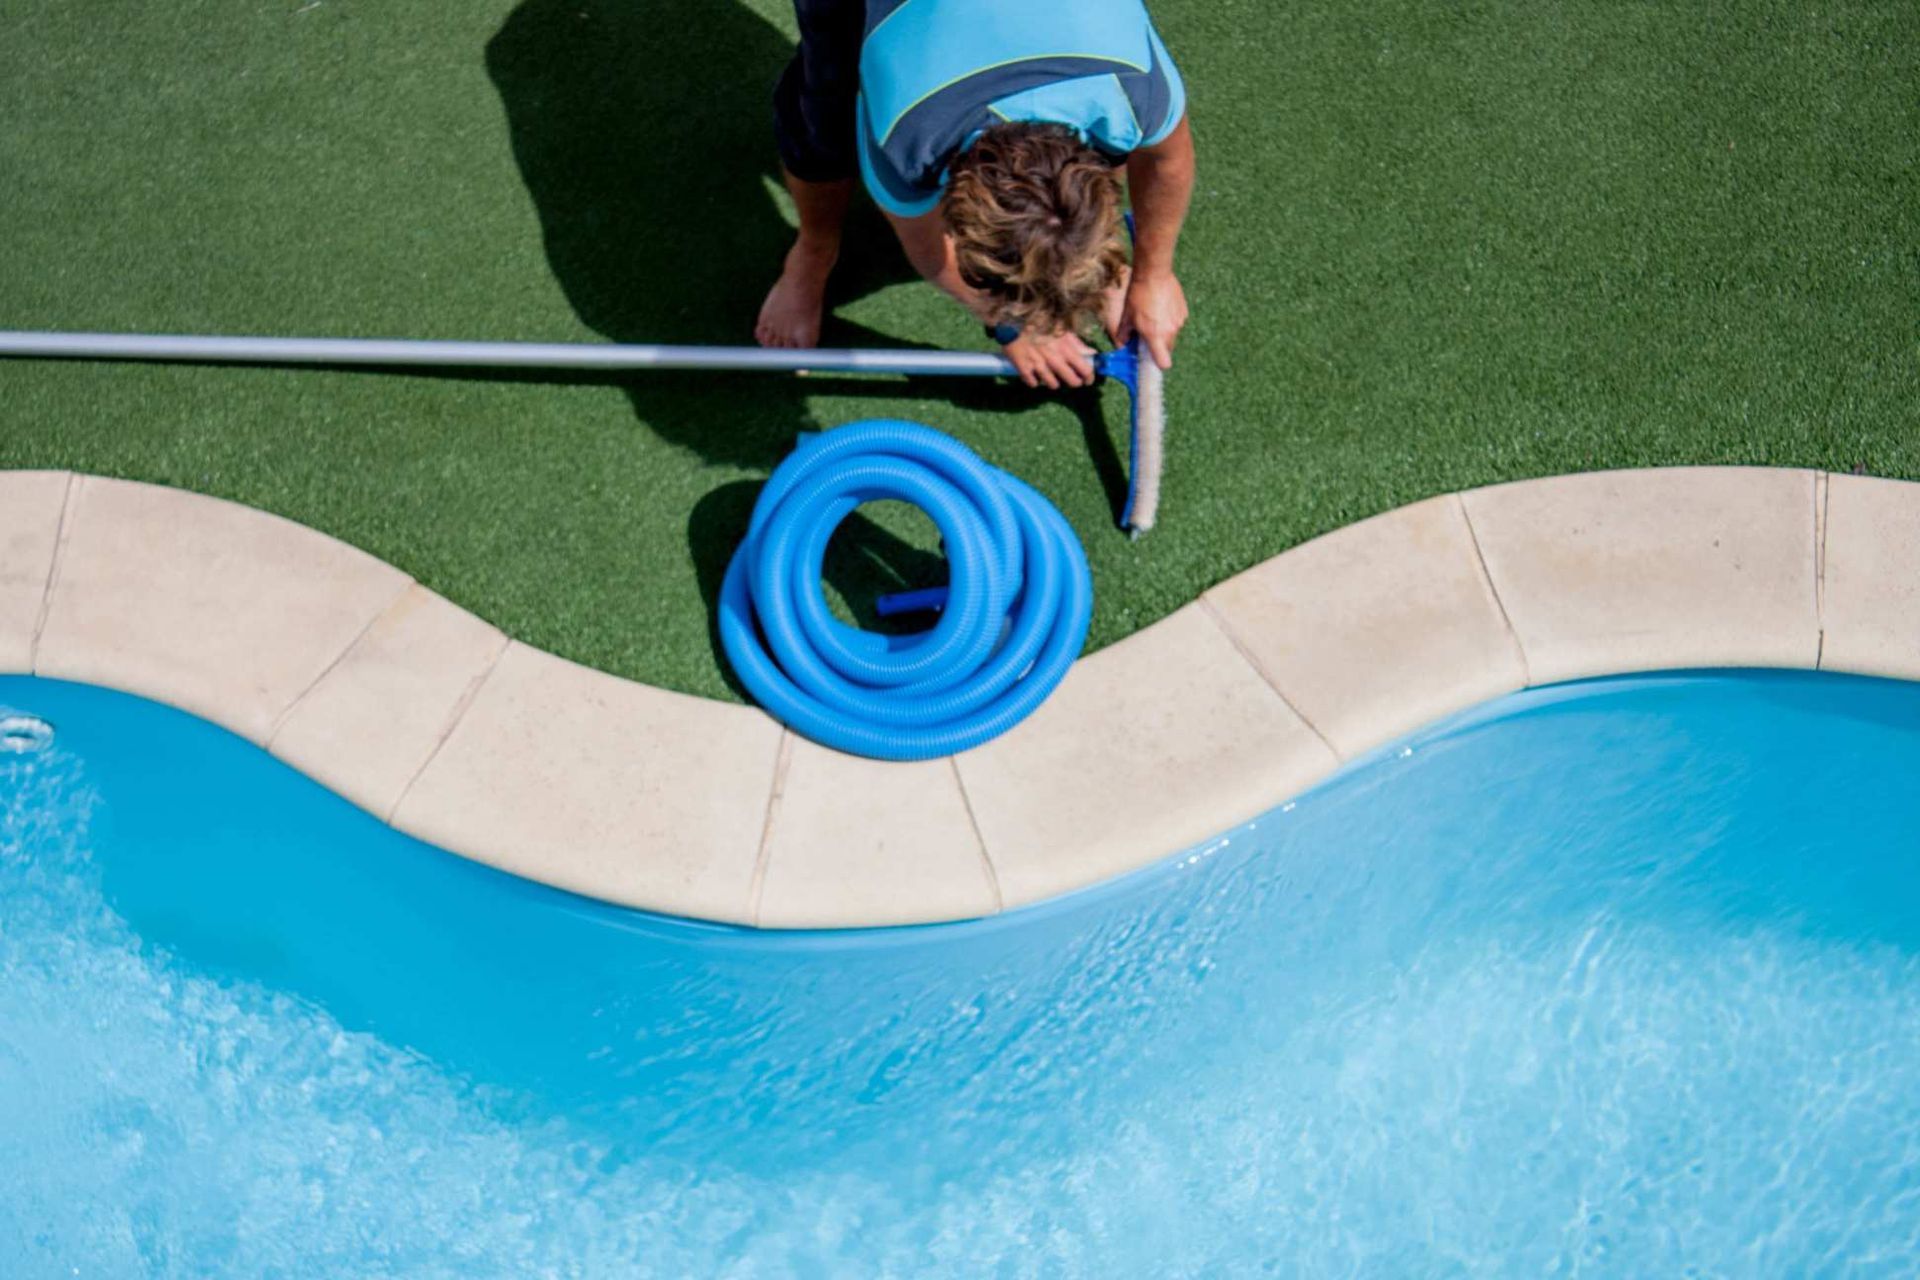 pool owner in the process of cleaning the artificial turf pool surround with a broom and a garden hose